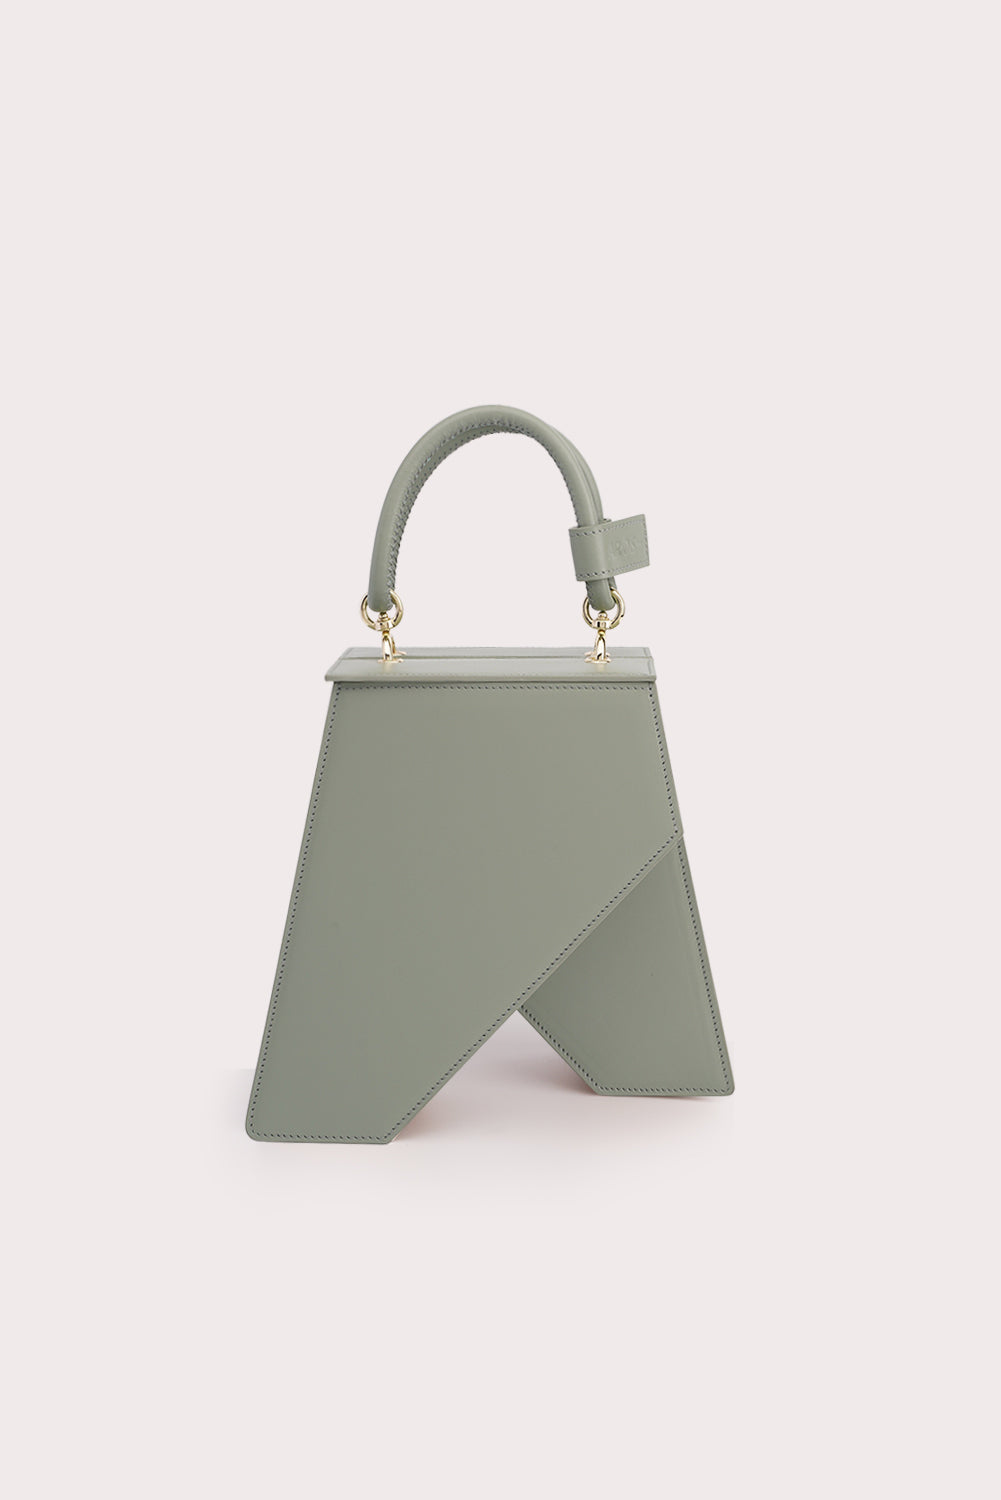 Trapezoid Tapo Bag in Matcha Green